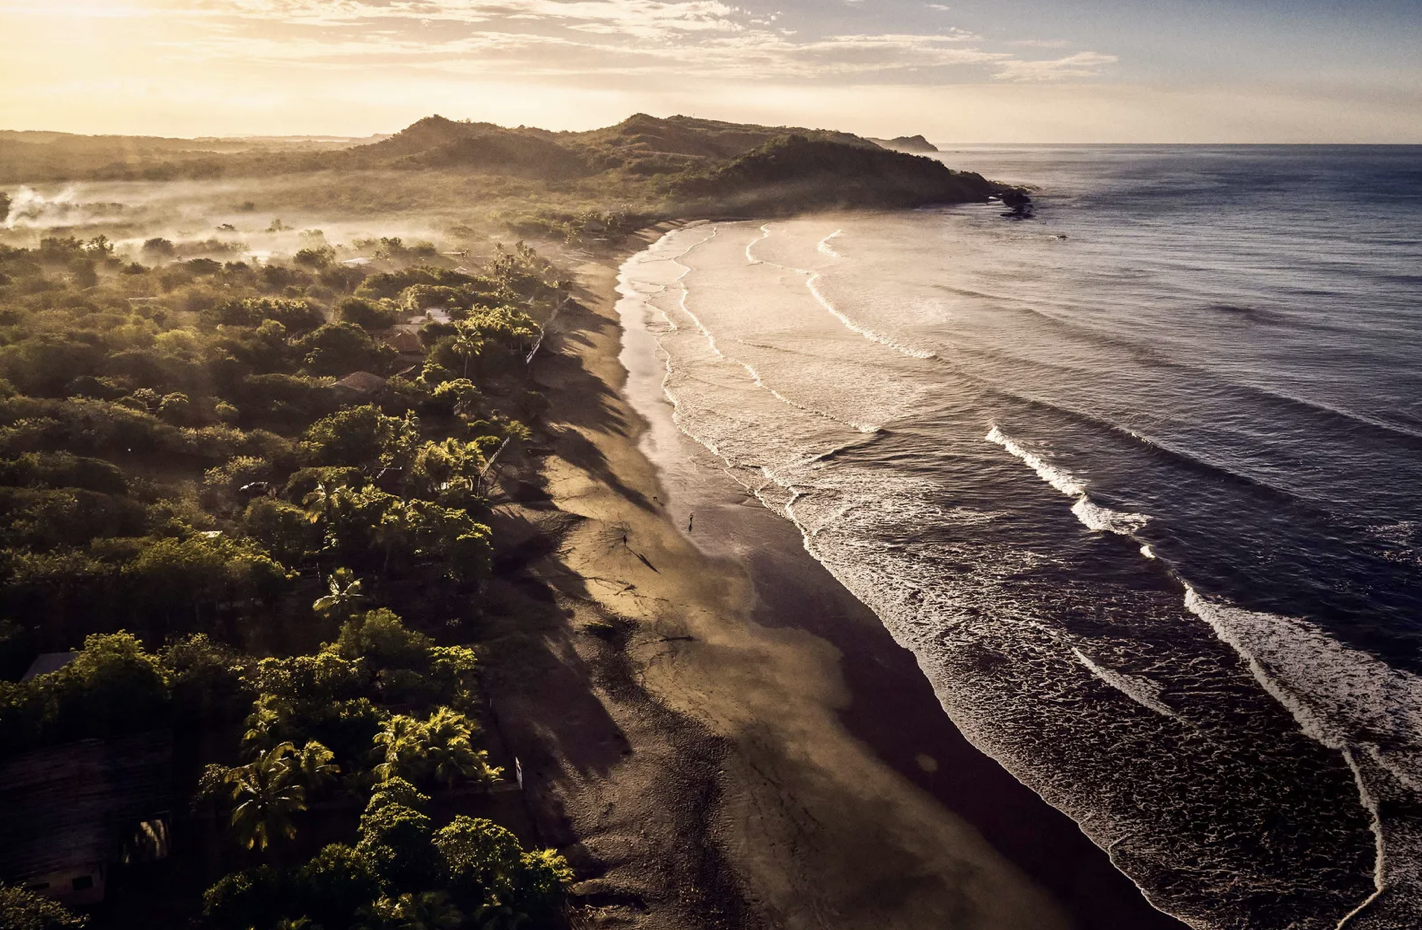 The emerging surf scene in Nicaragua: Where to go